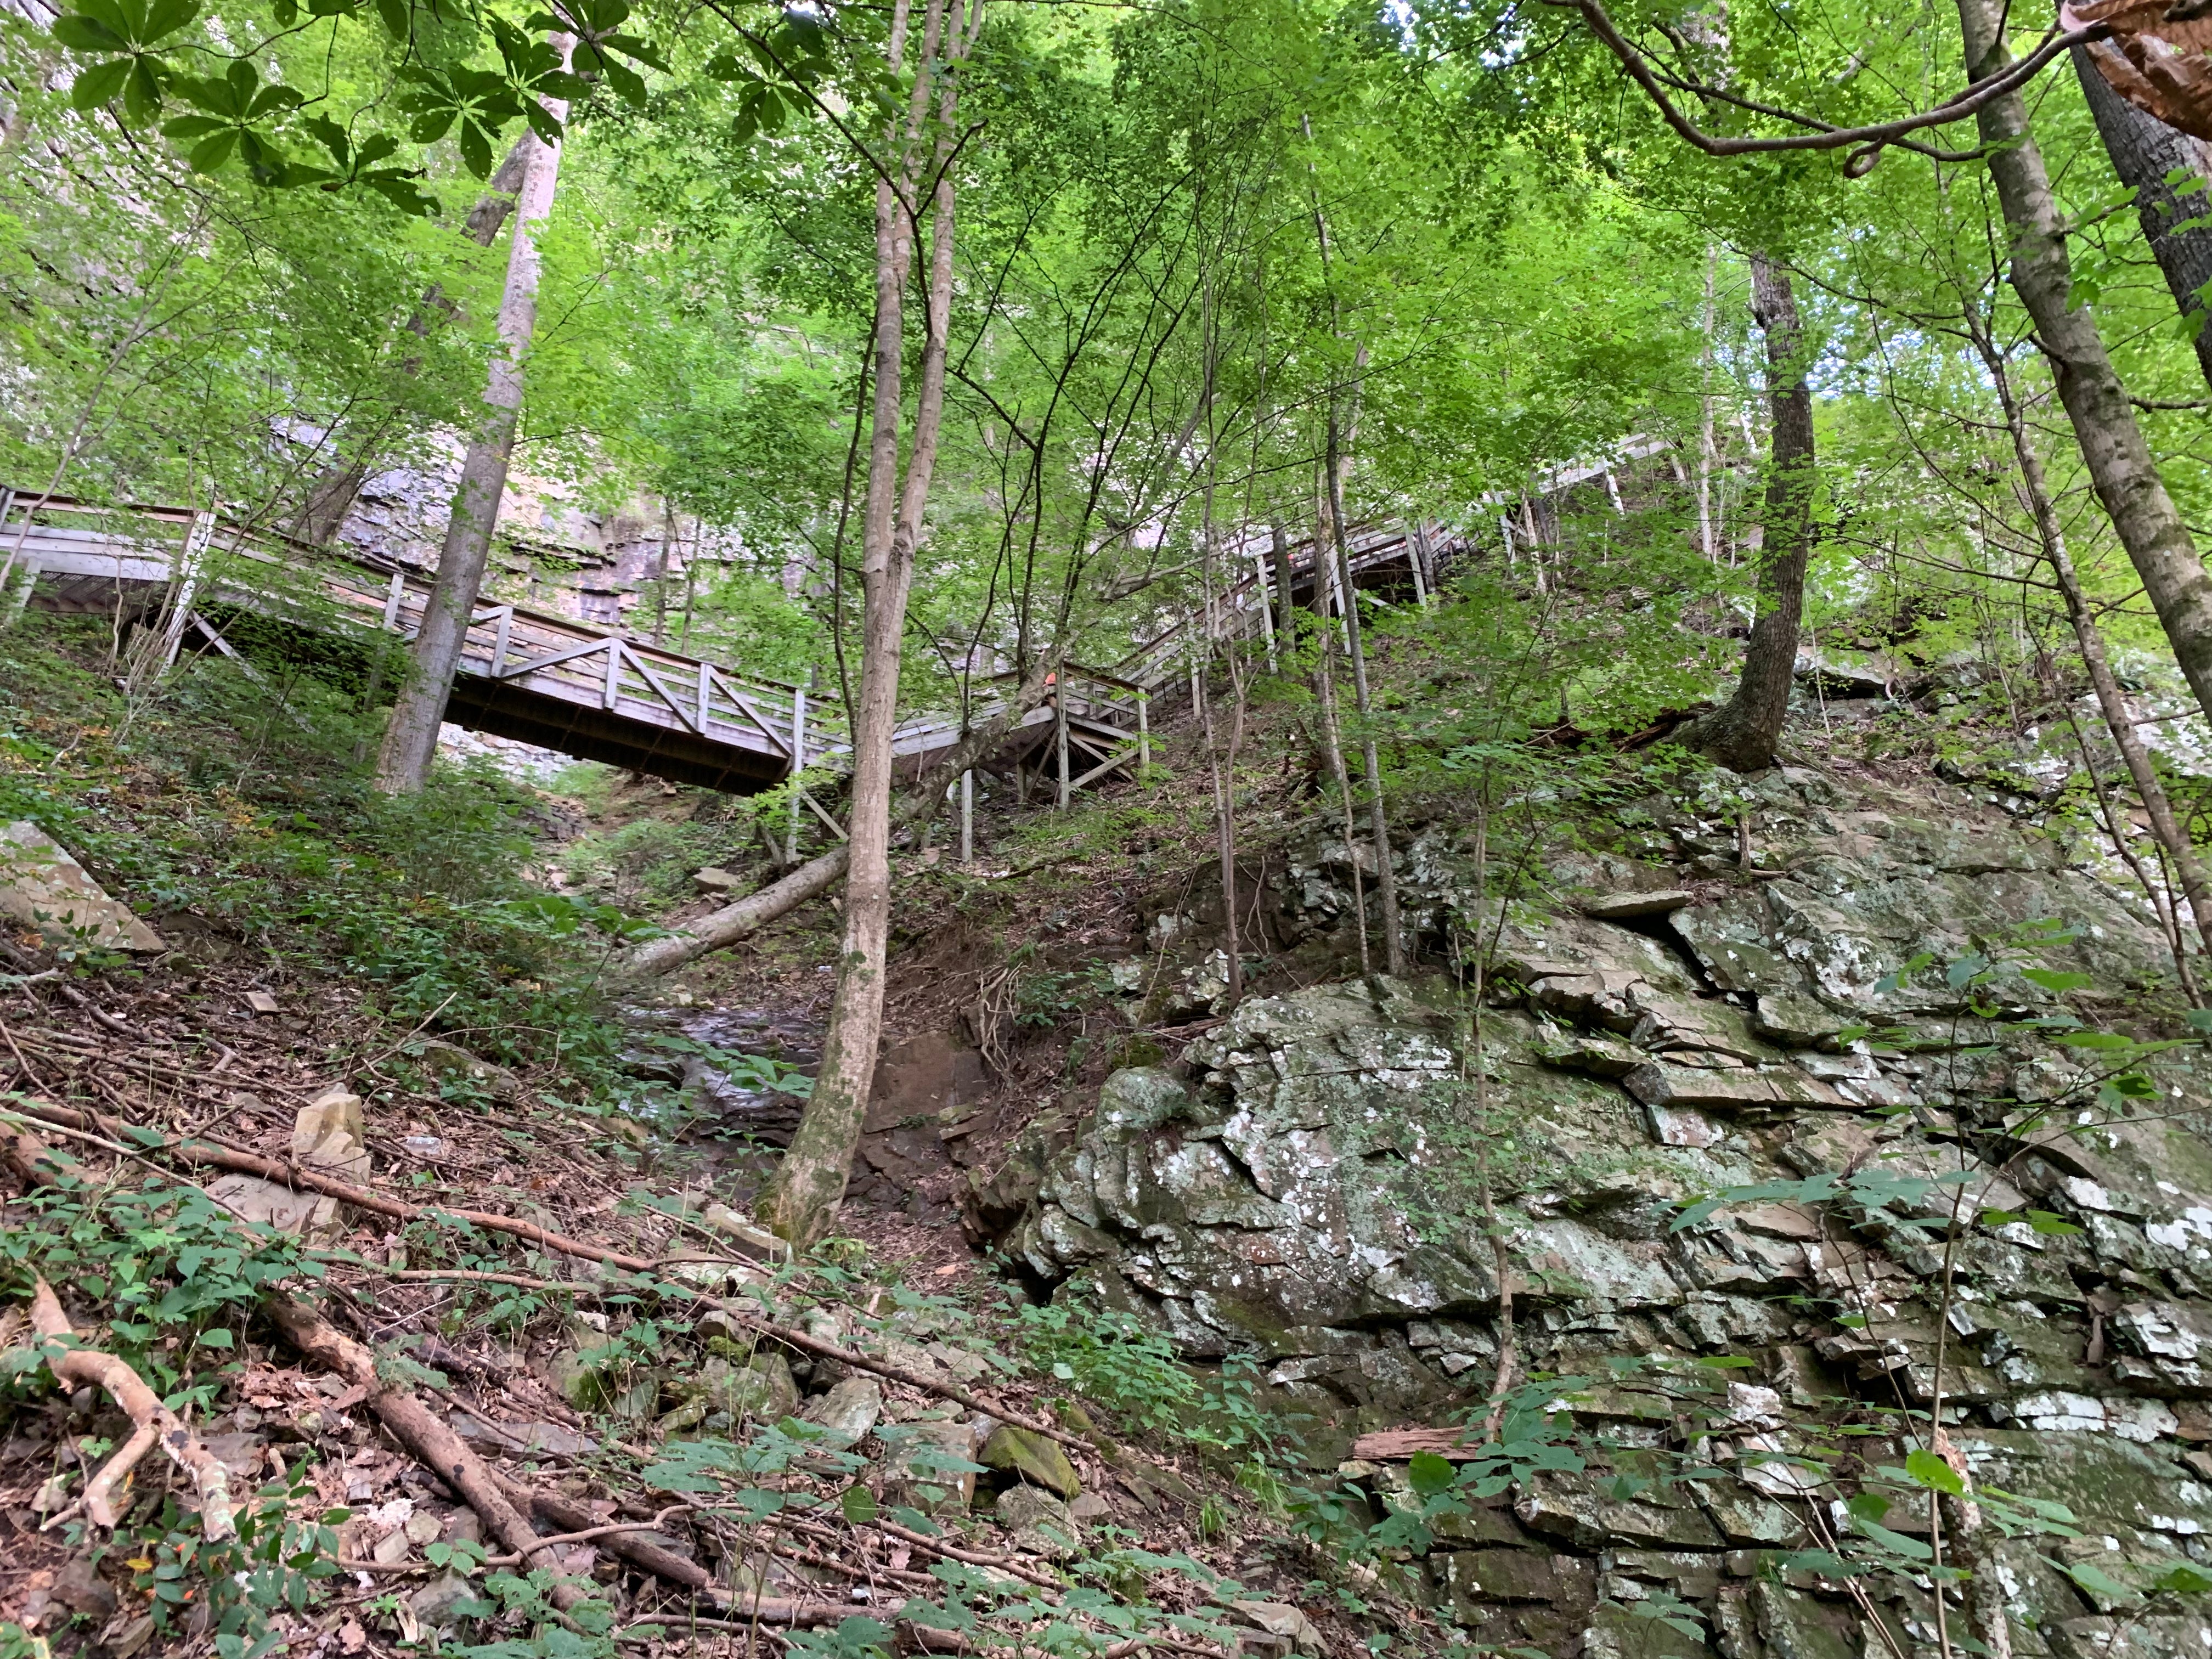 Some of the stairs on the waterfall trail.